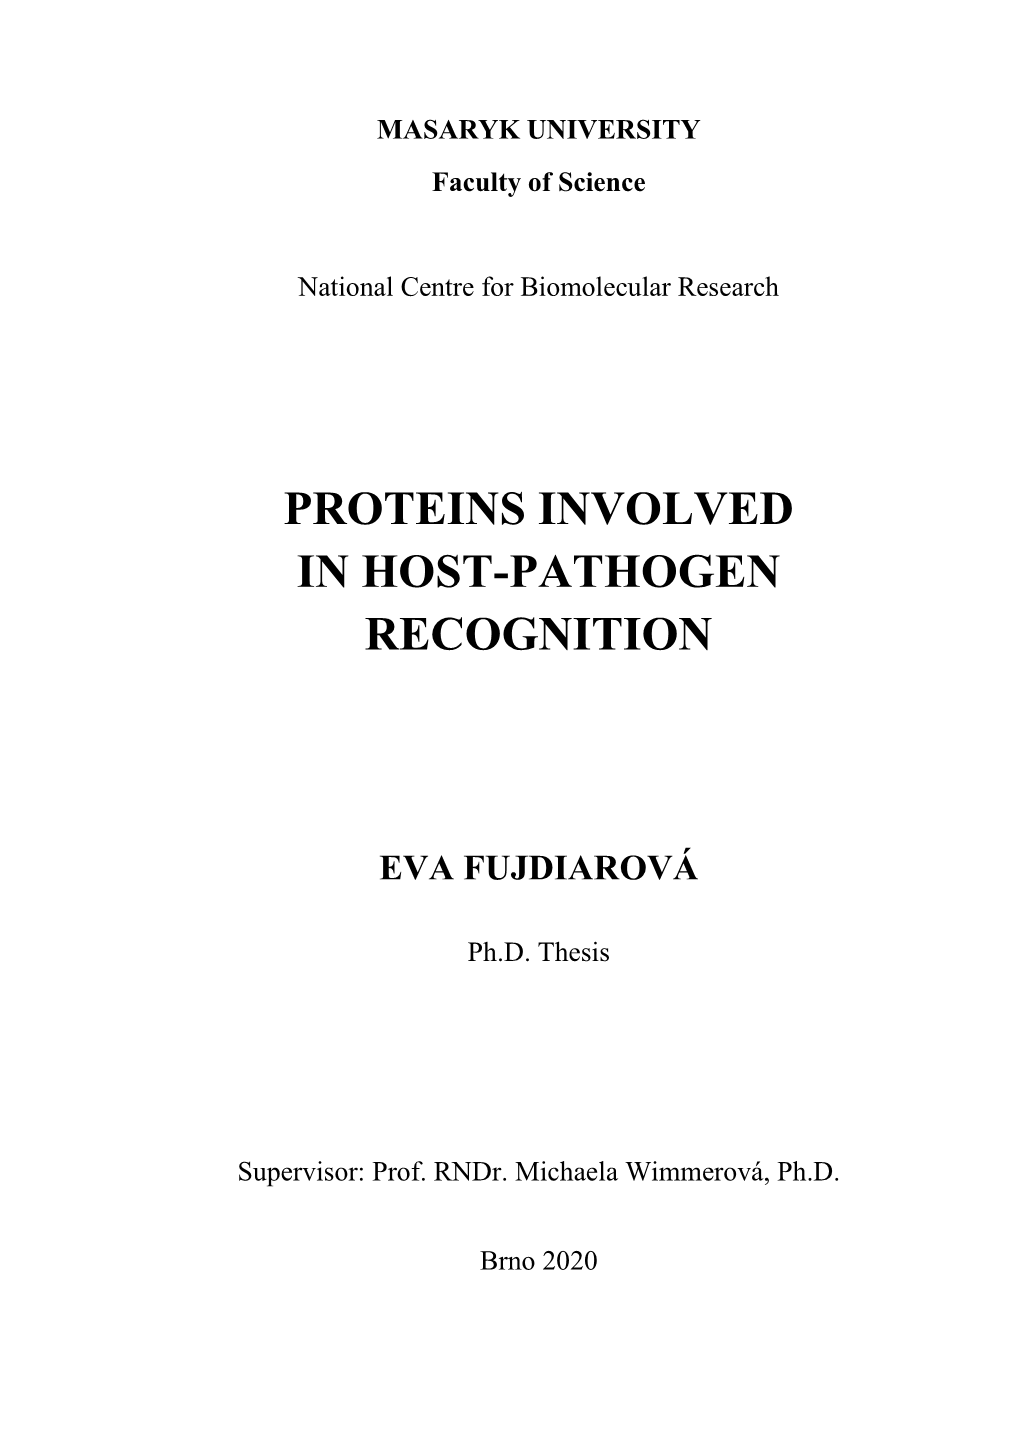 Proteins Involved in Host-Pathogen Recognition